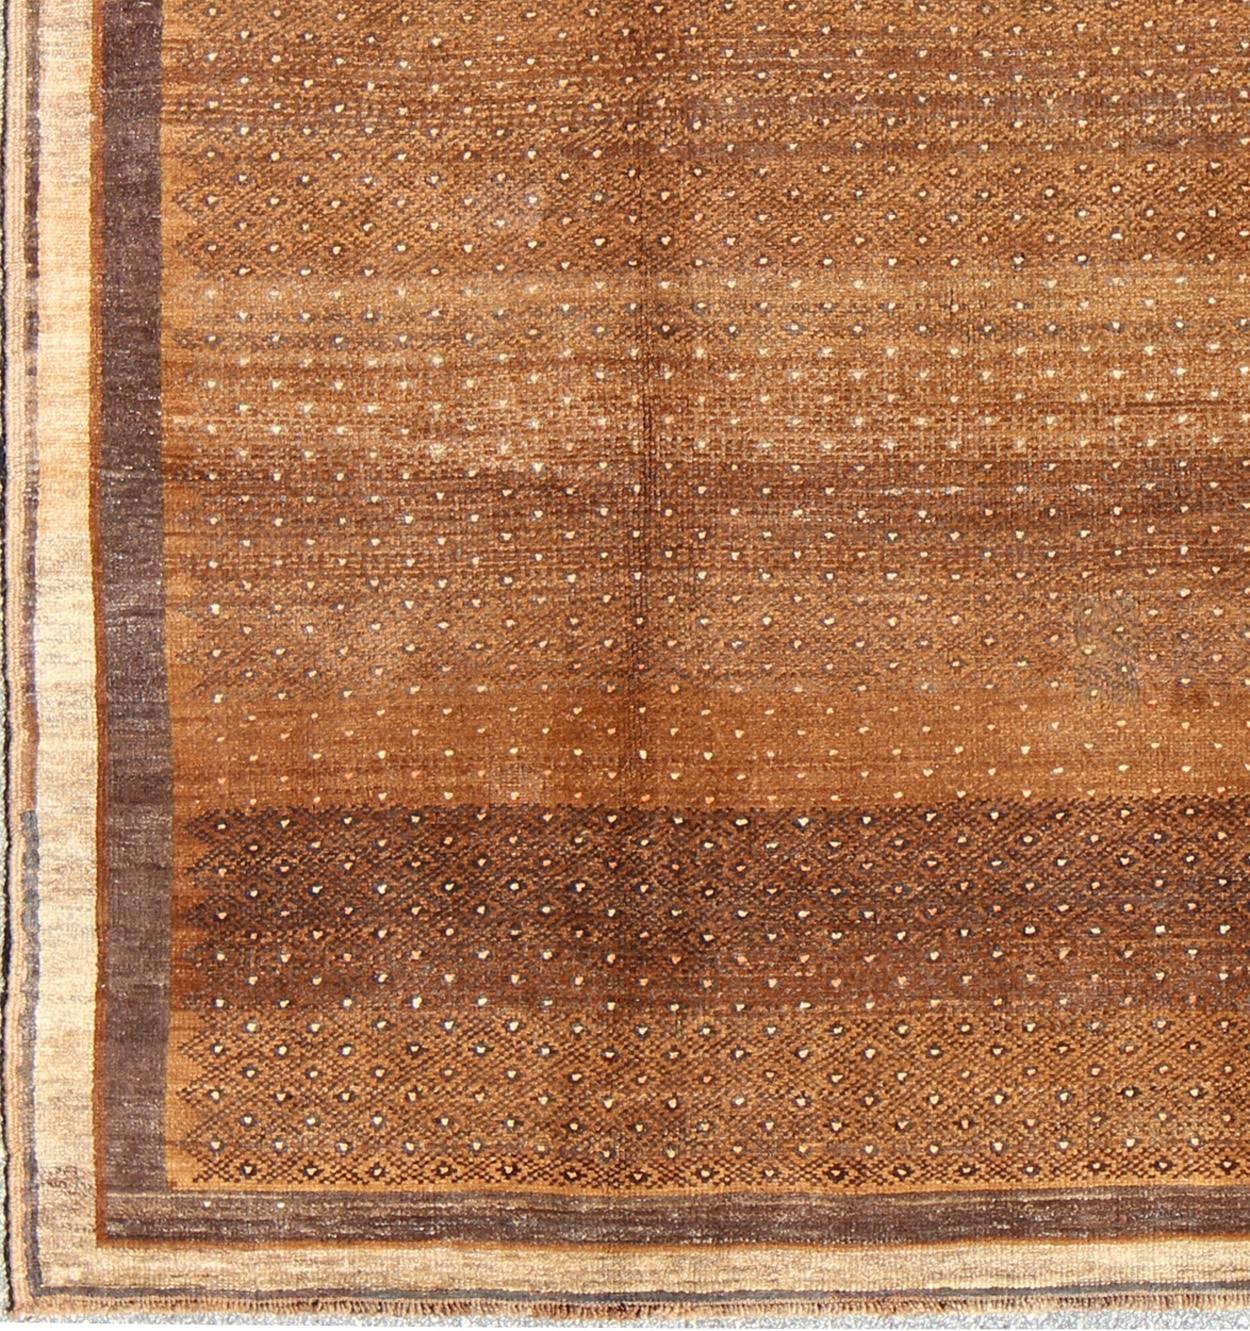       Vintage Turkish Rug With All-Over Modern Design in Shades of Brown, Keivan Woven Arts / rug EN-484, country of origin / type: Turkey / Oushak, circa mid-20th century.

Set on a brown field with an all-over modern/Mid-Century Modern pattern,